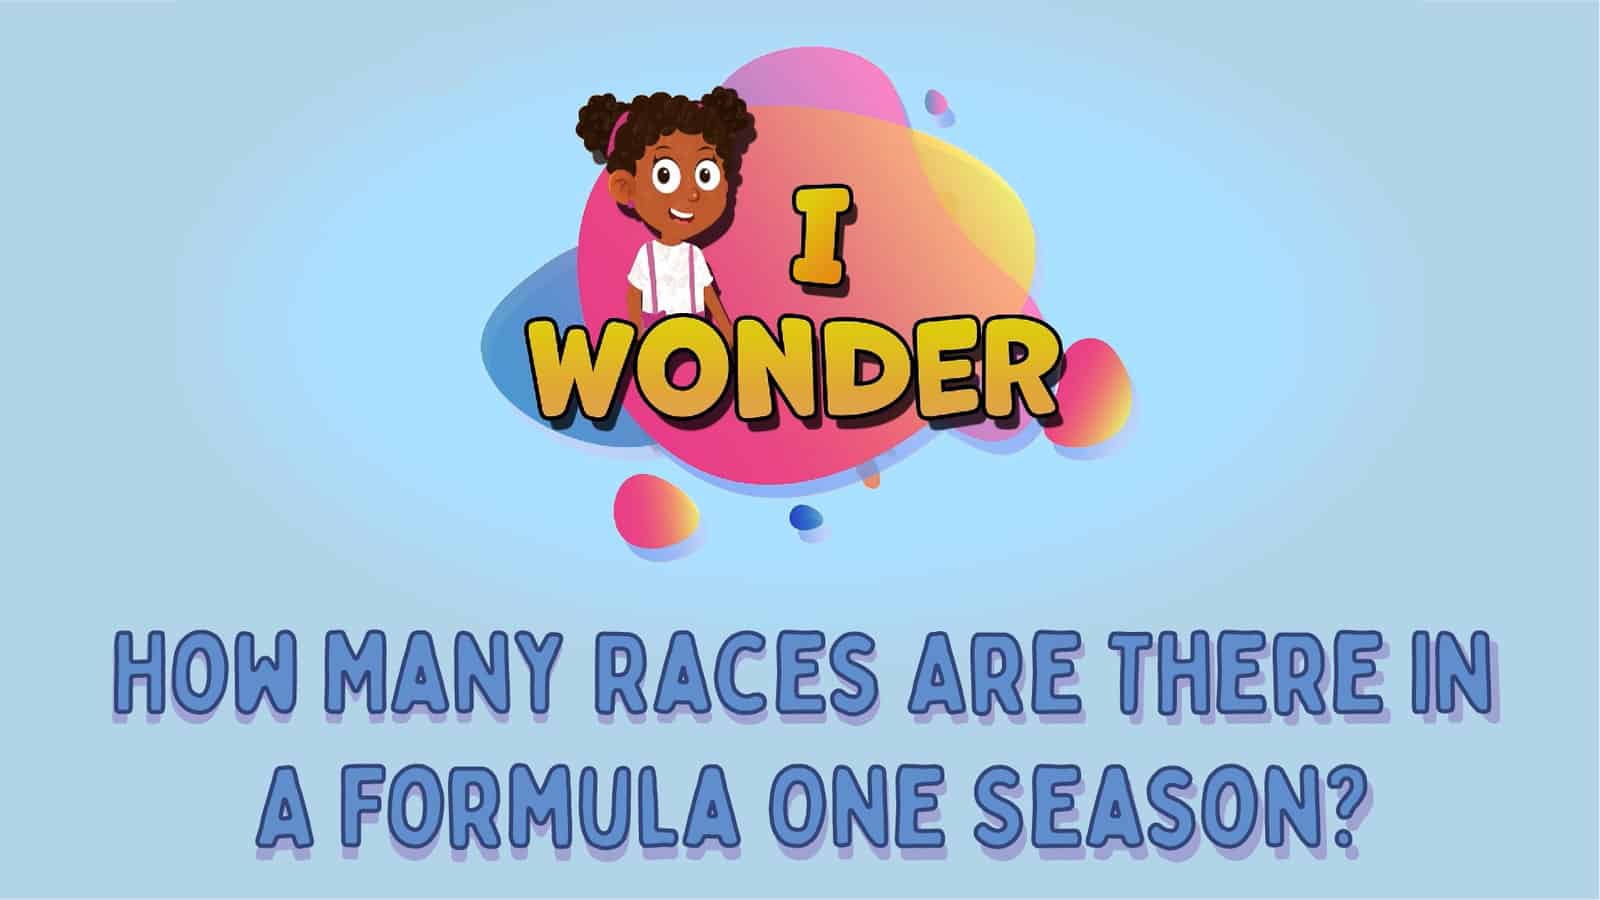 How Many Races Are There In A Formula One Season?